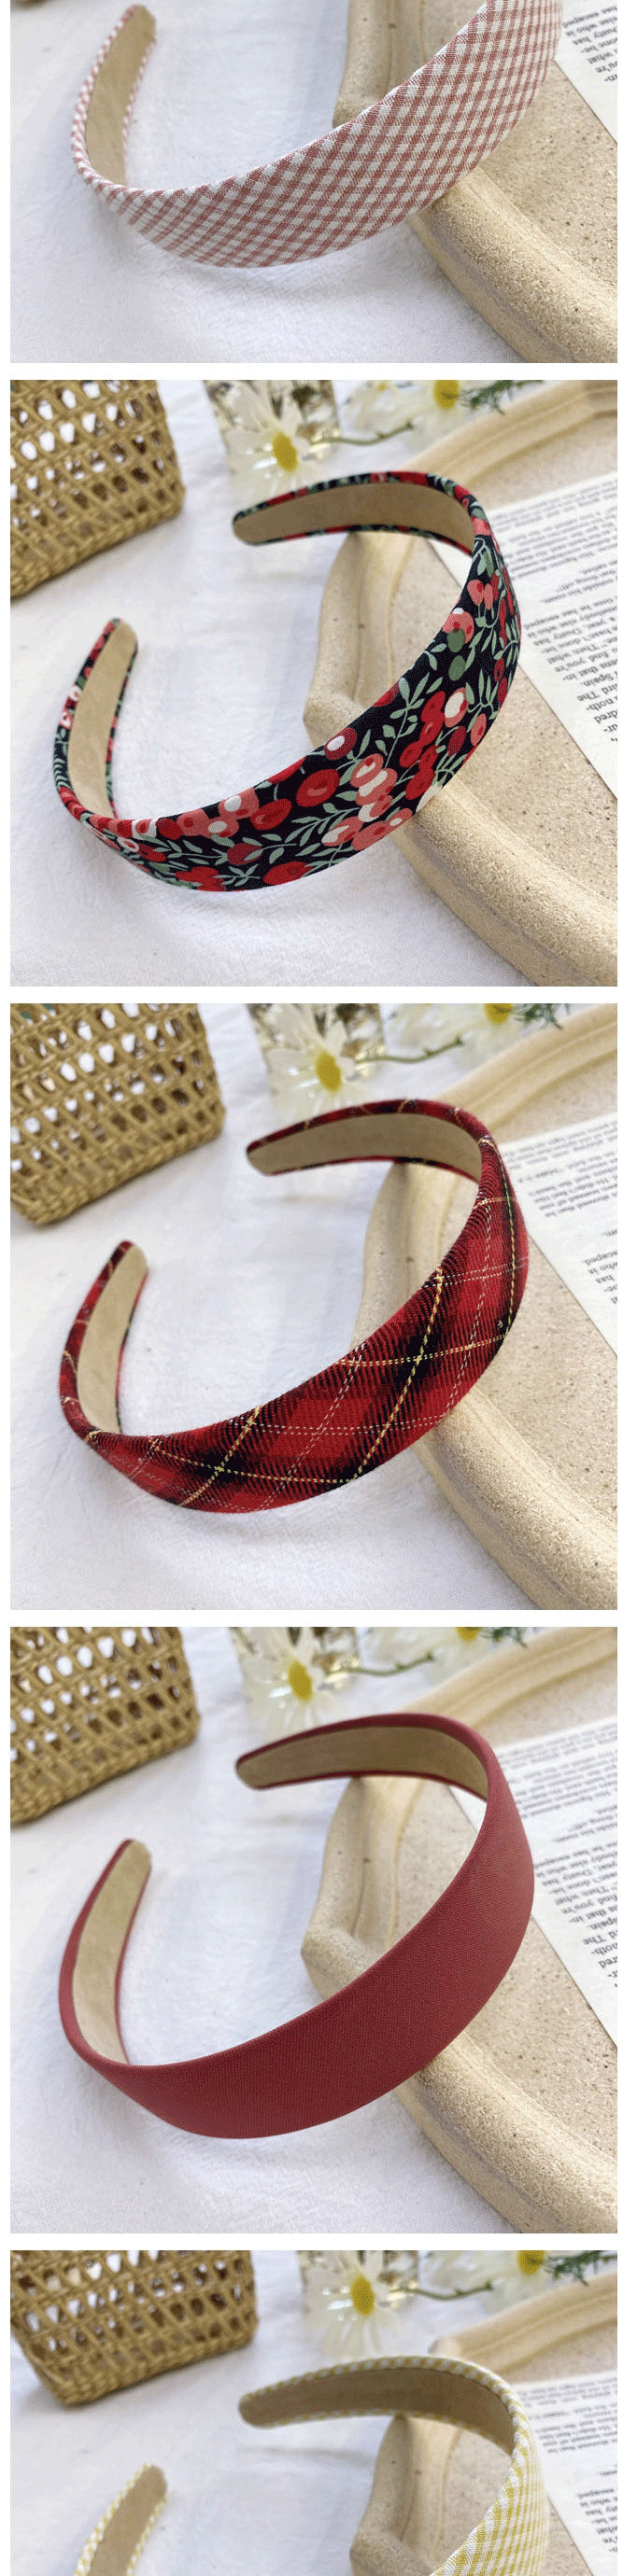 Fashion Solid Red Floral Checked Printed Broadband Hairband,Head Band